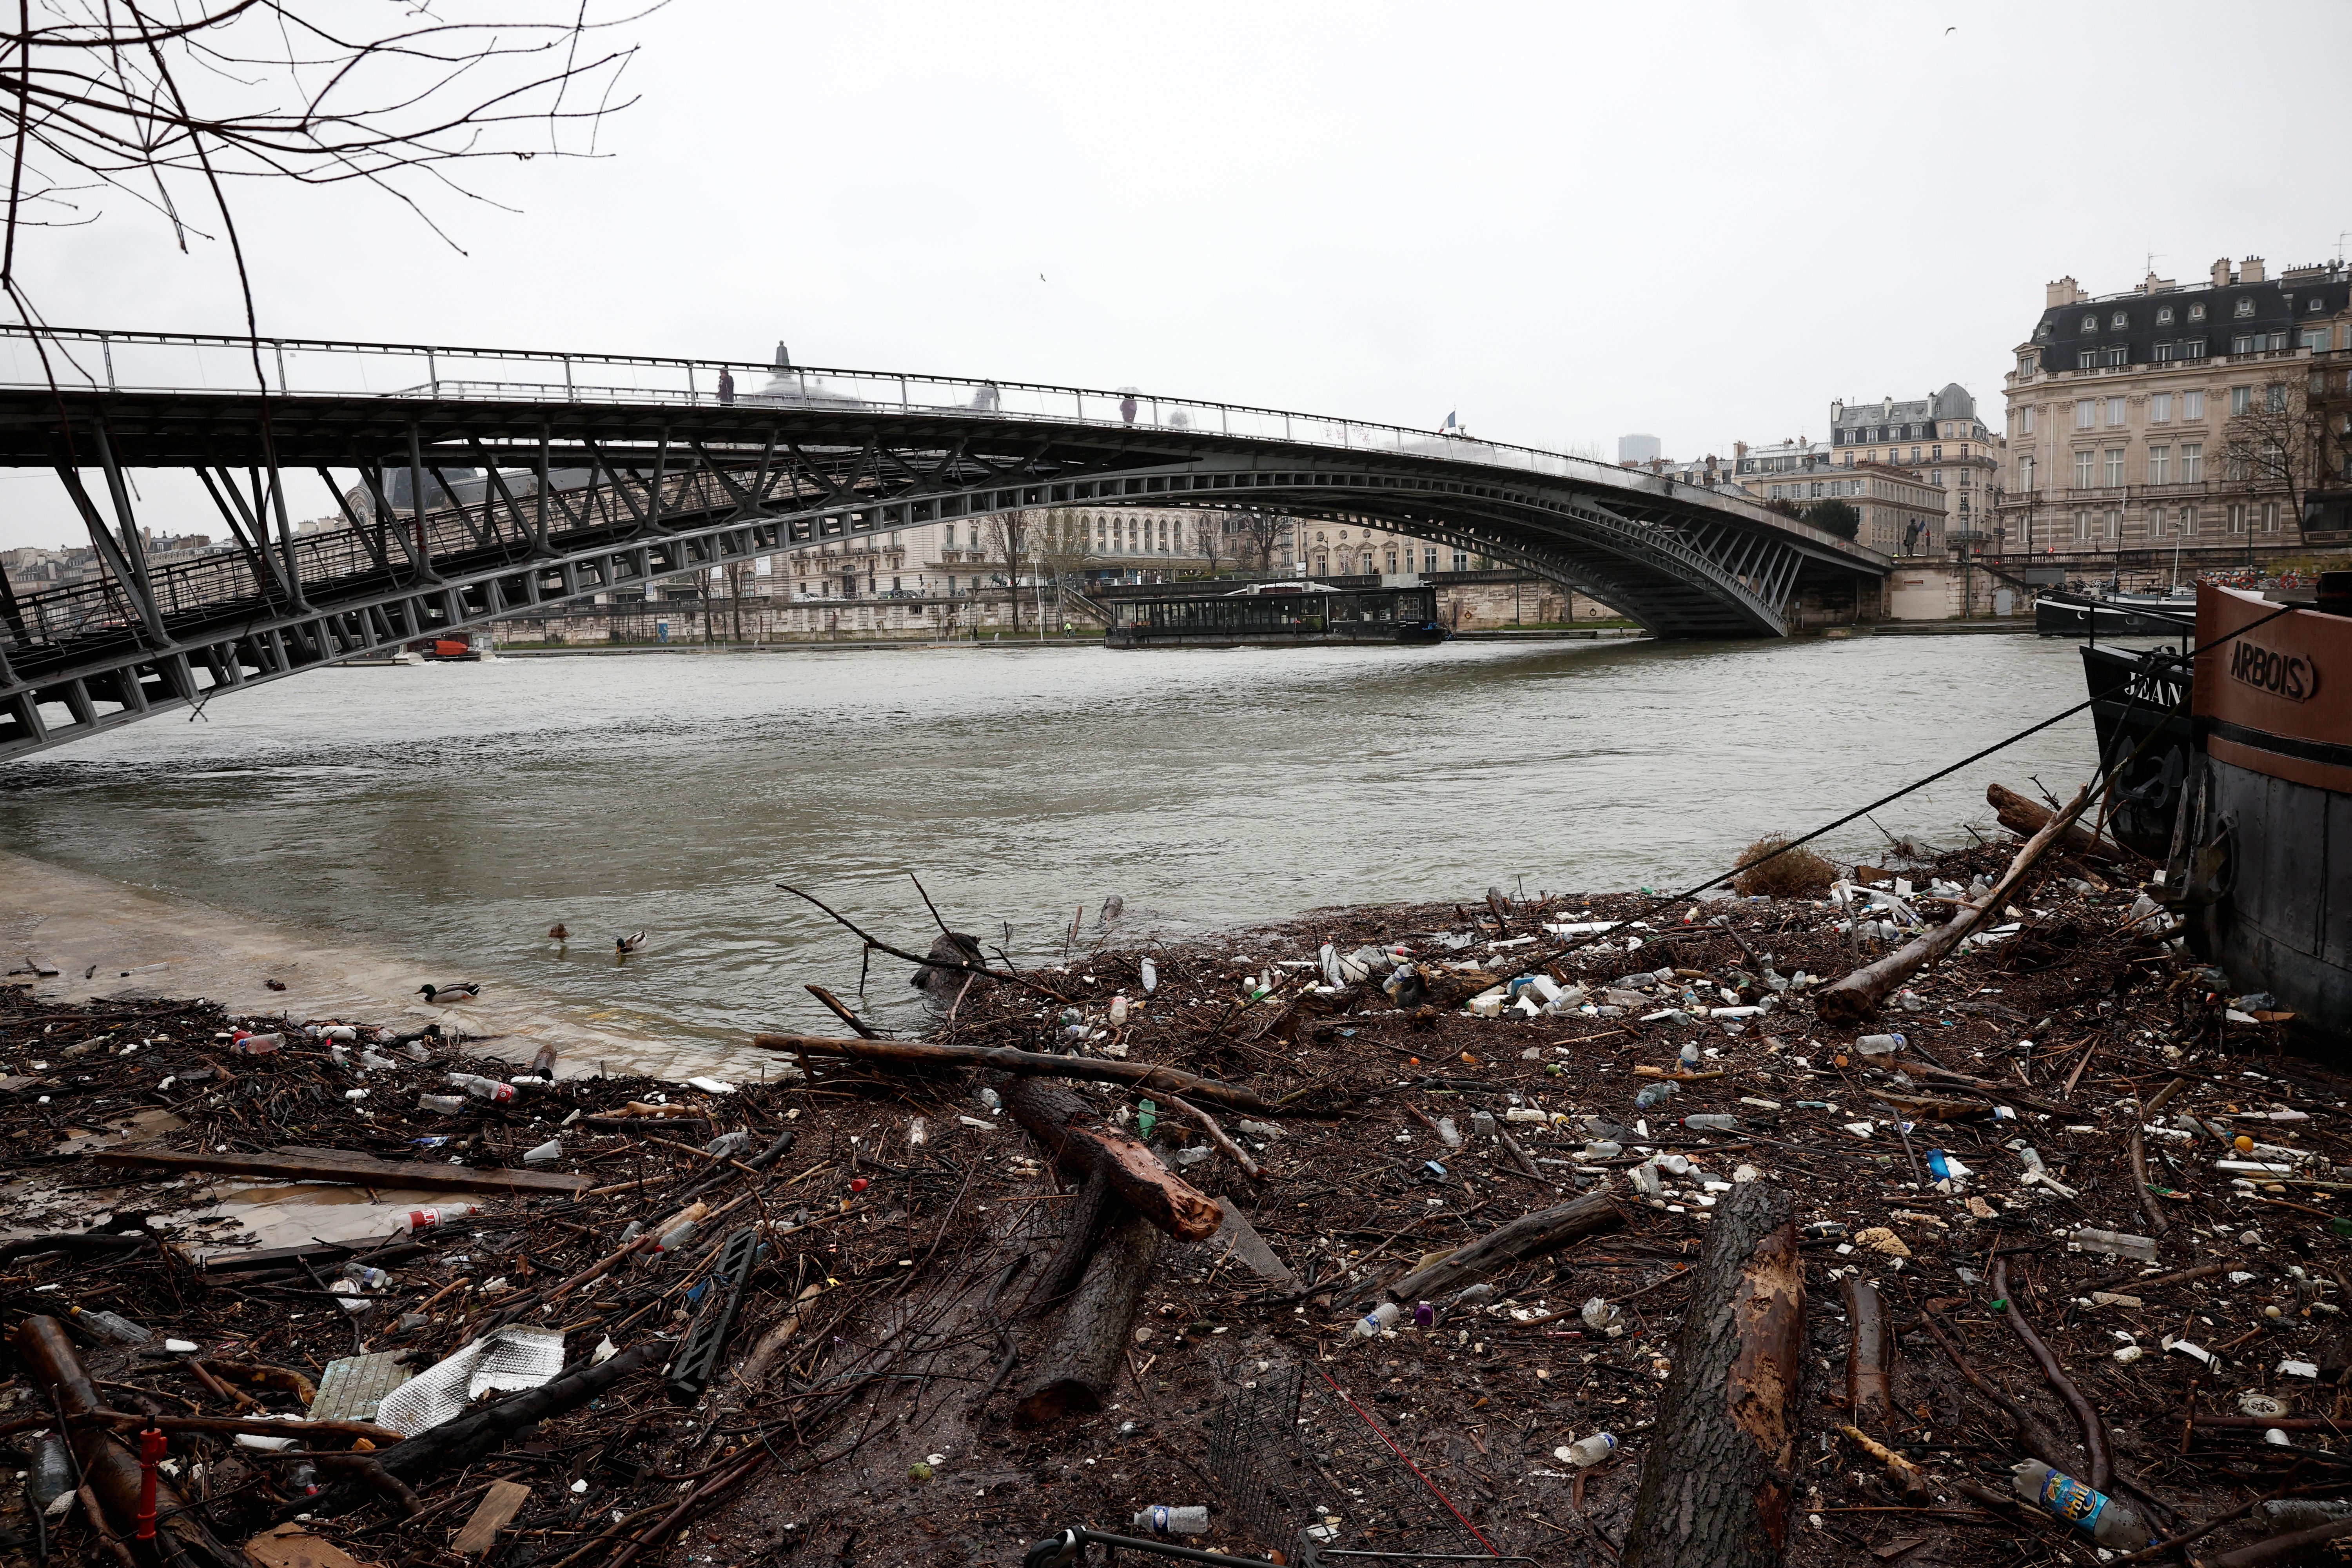 Debris and waste are pictured in the Seine River as the level of river has exceeded the 4-meter mark in Paris